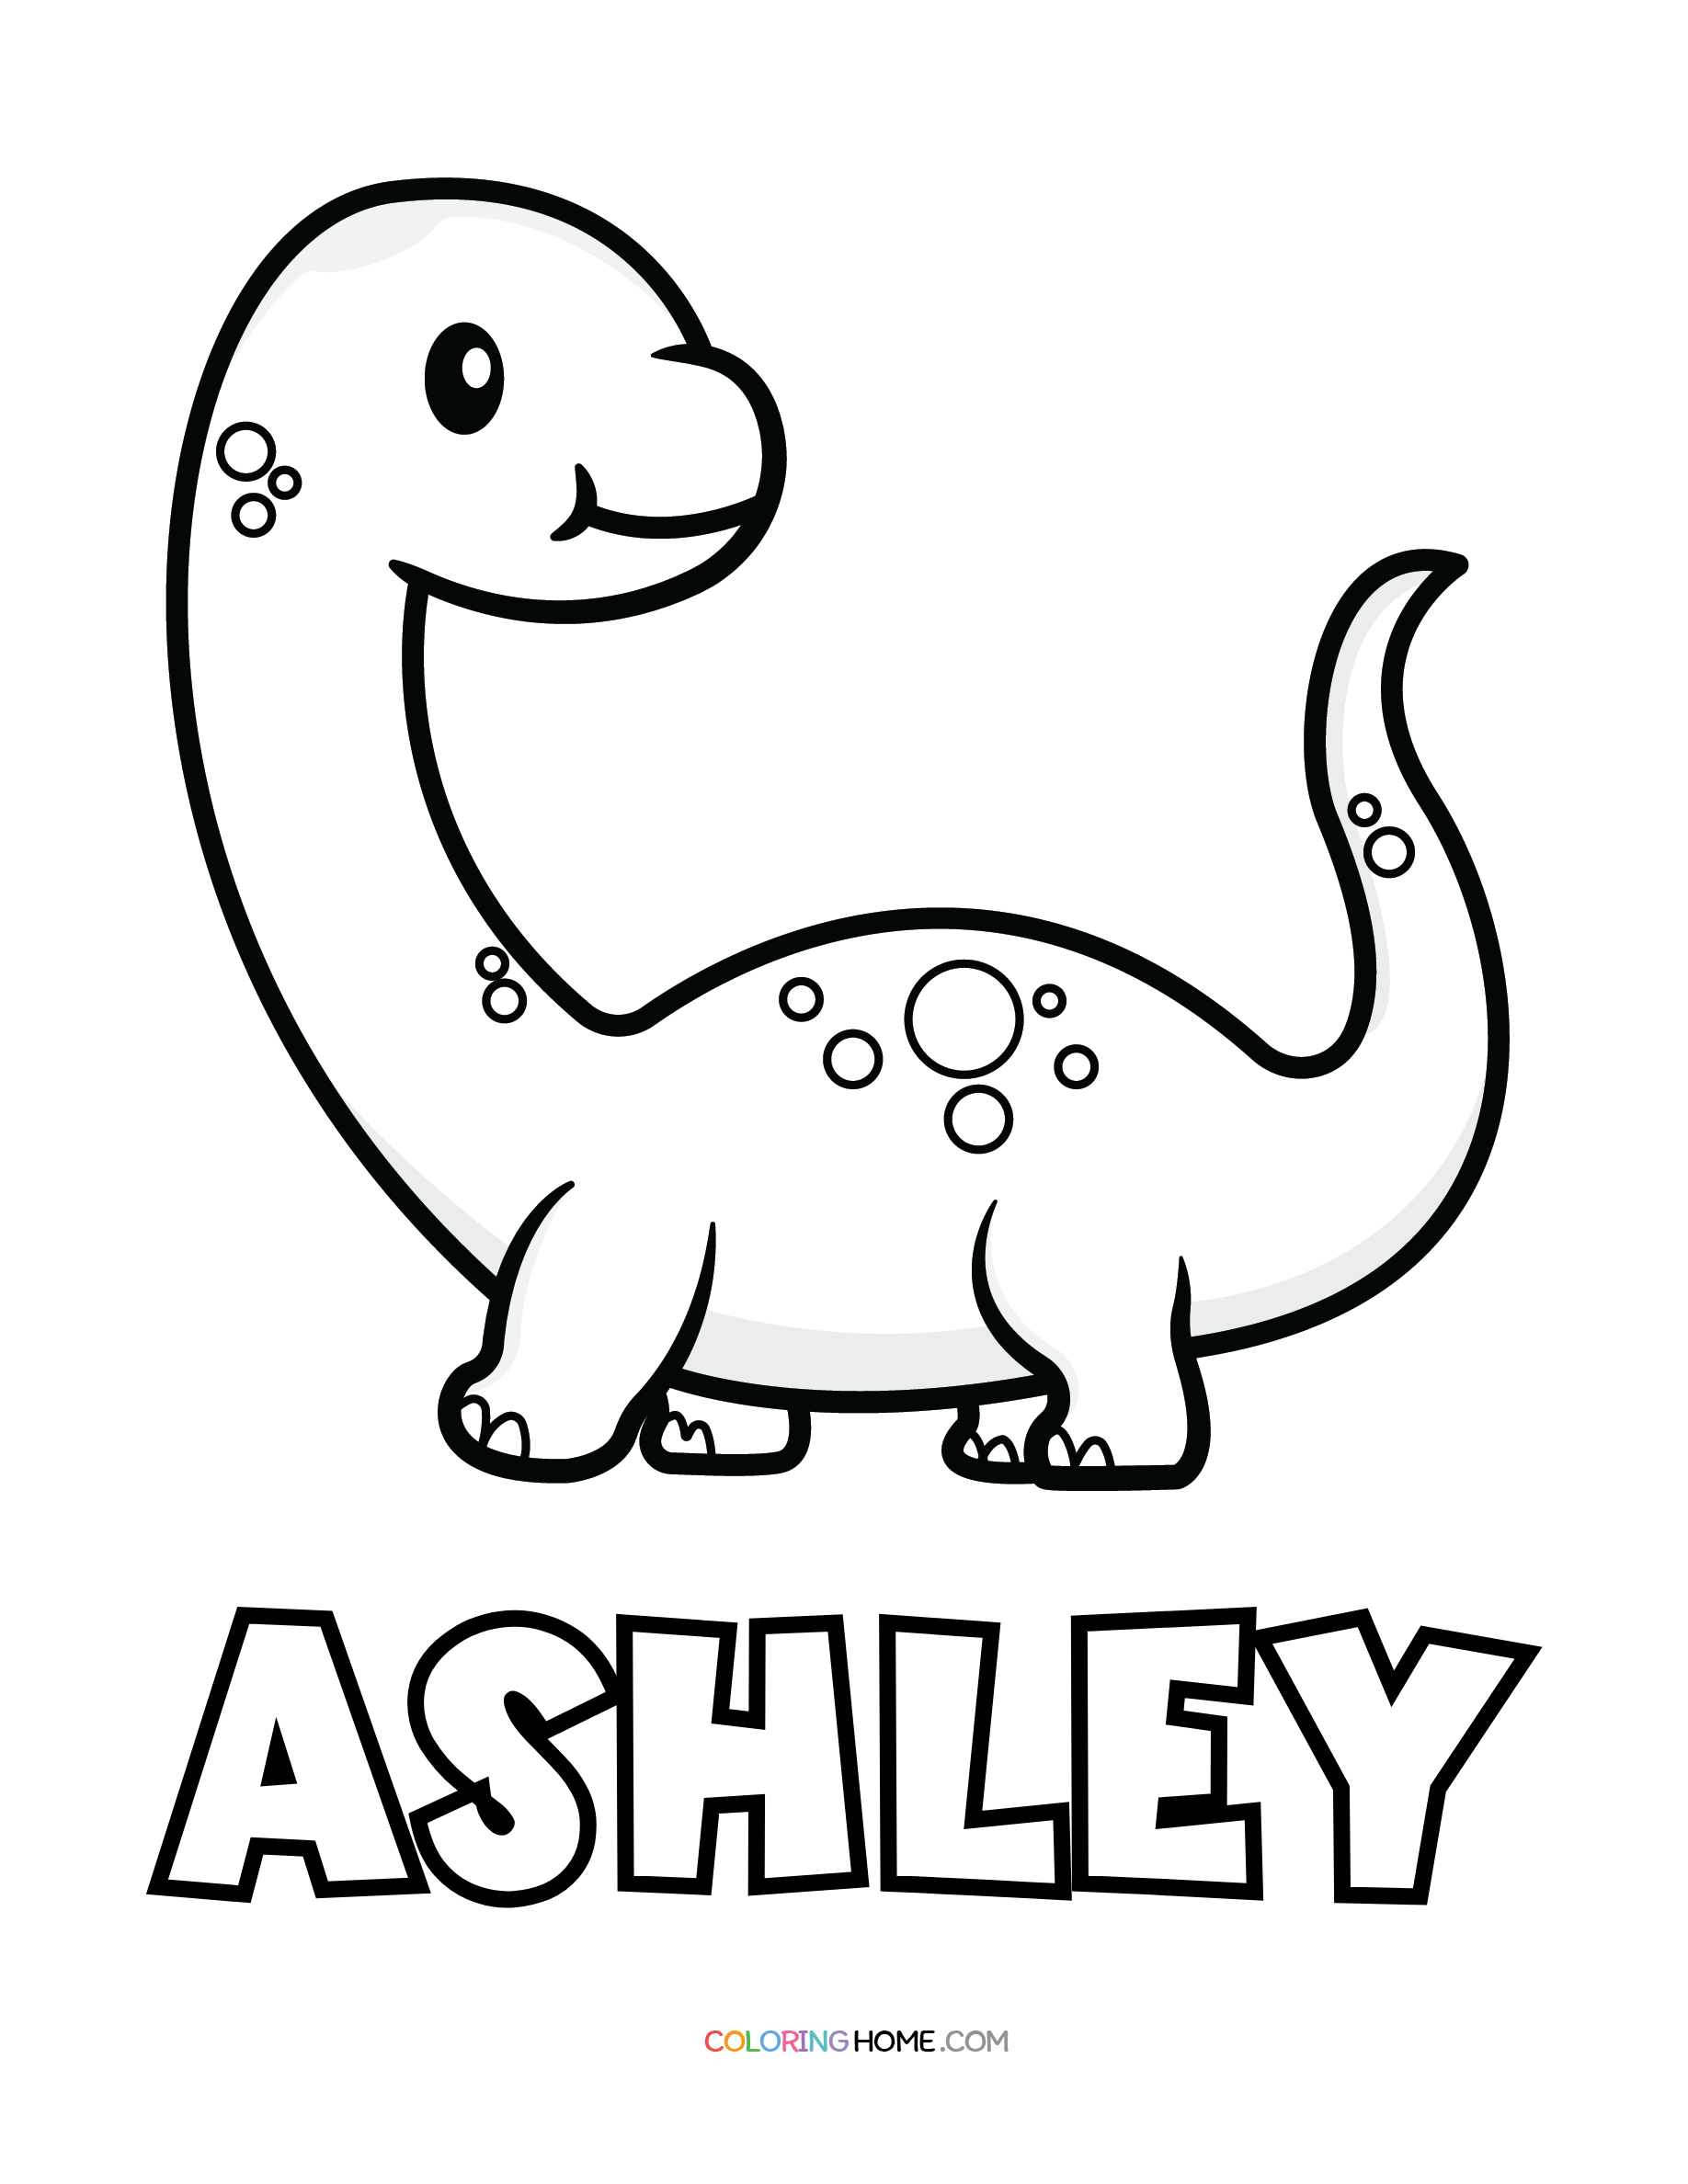 Ashley Name Coloring Pages - Coloring Nation